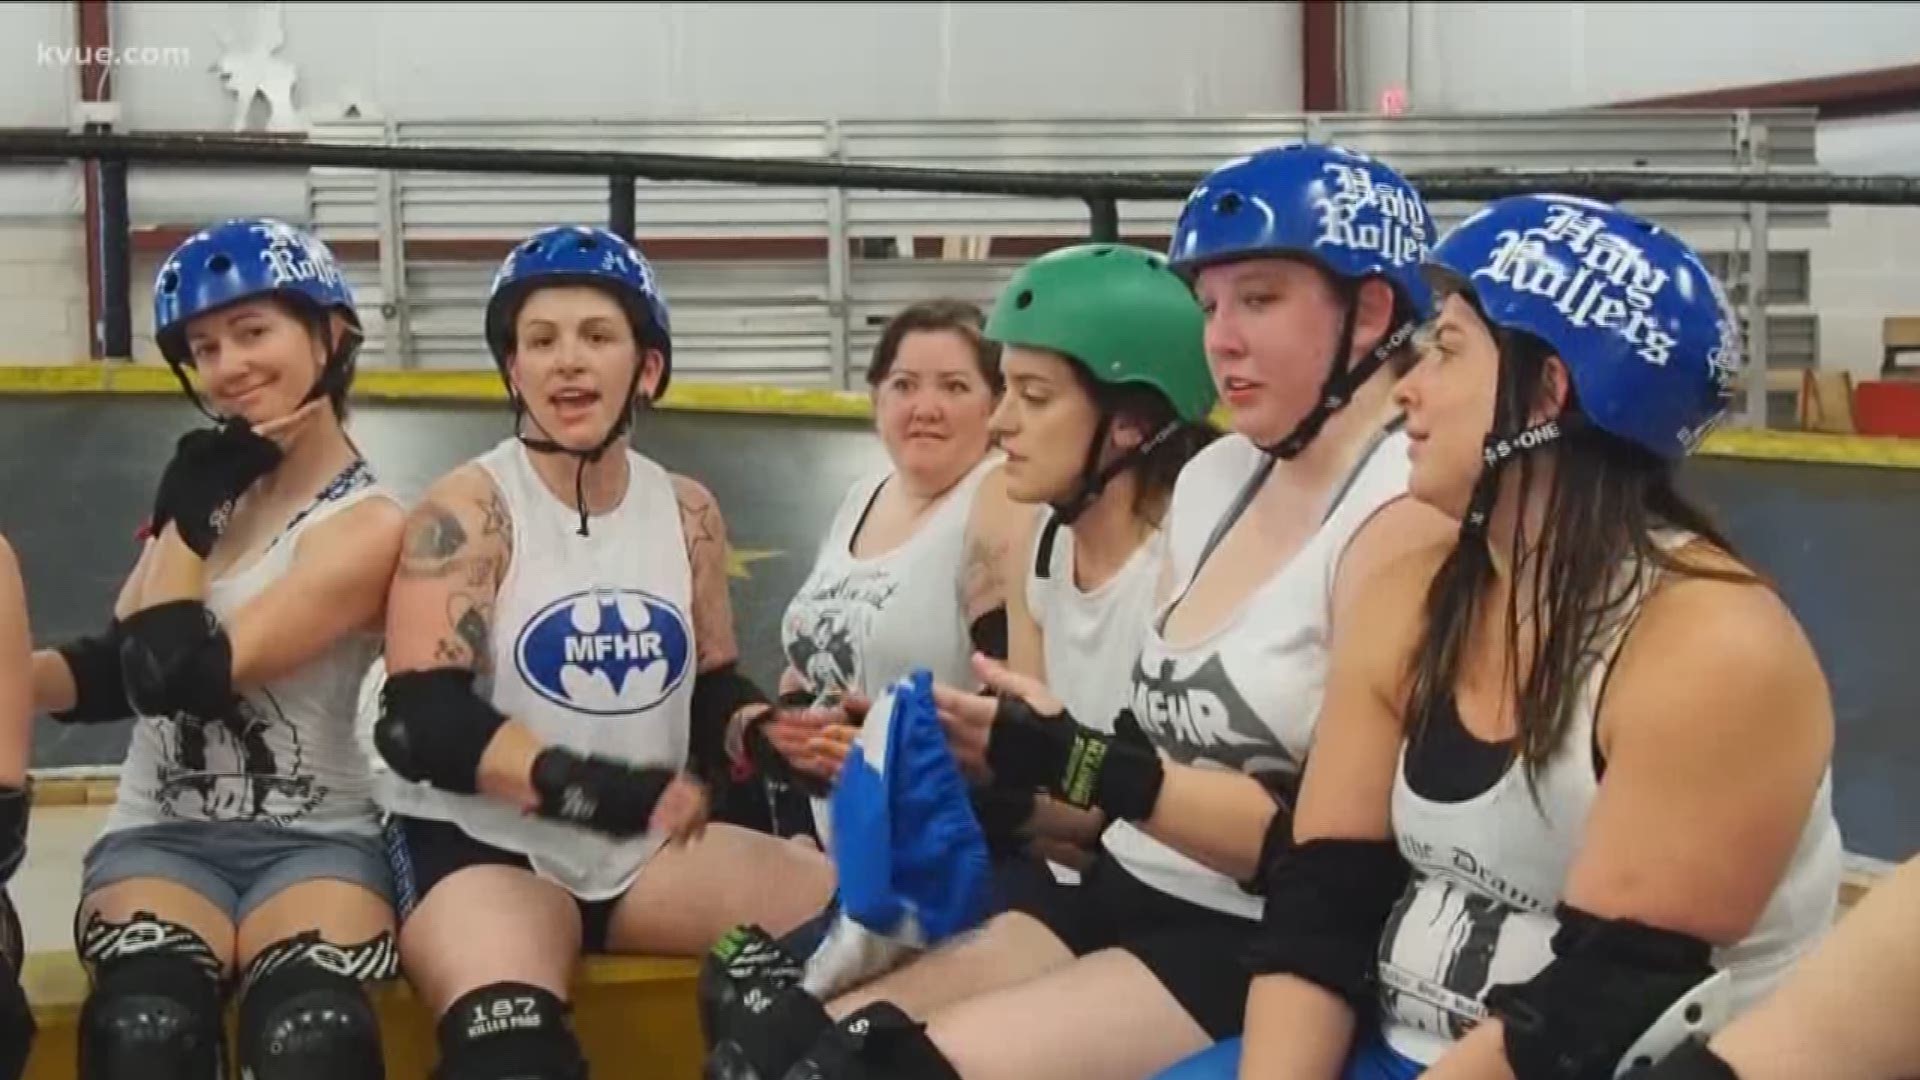 Texas Roller Derby tryouts this weekend in Austin